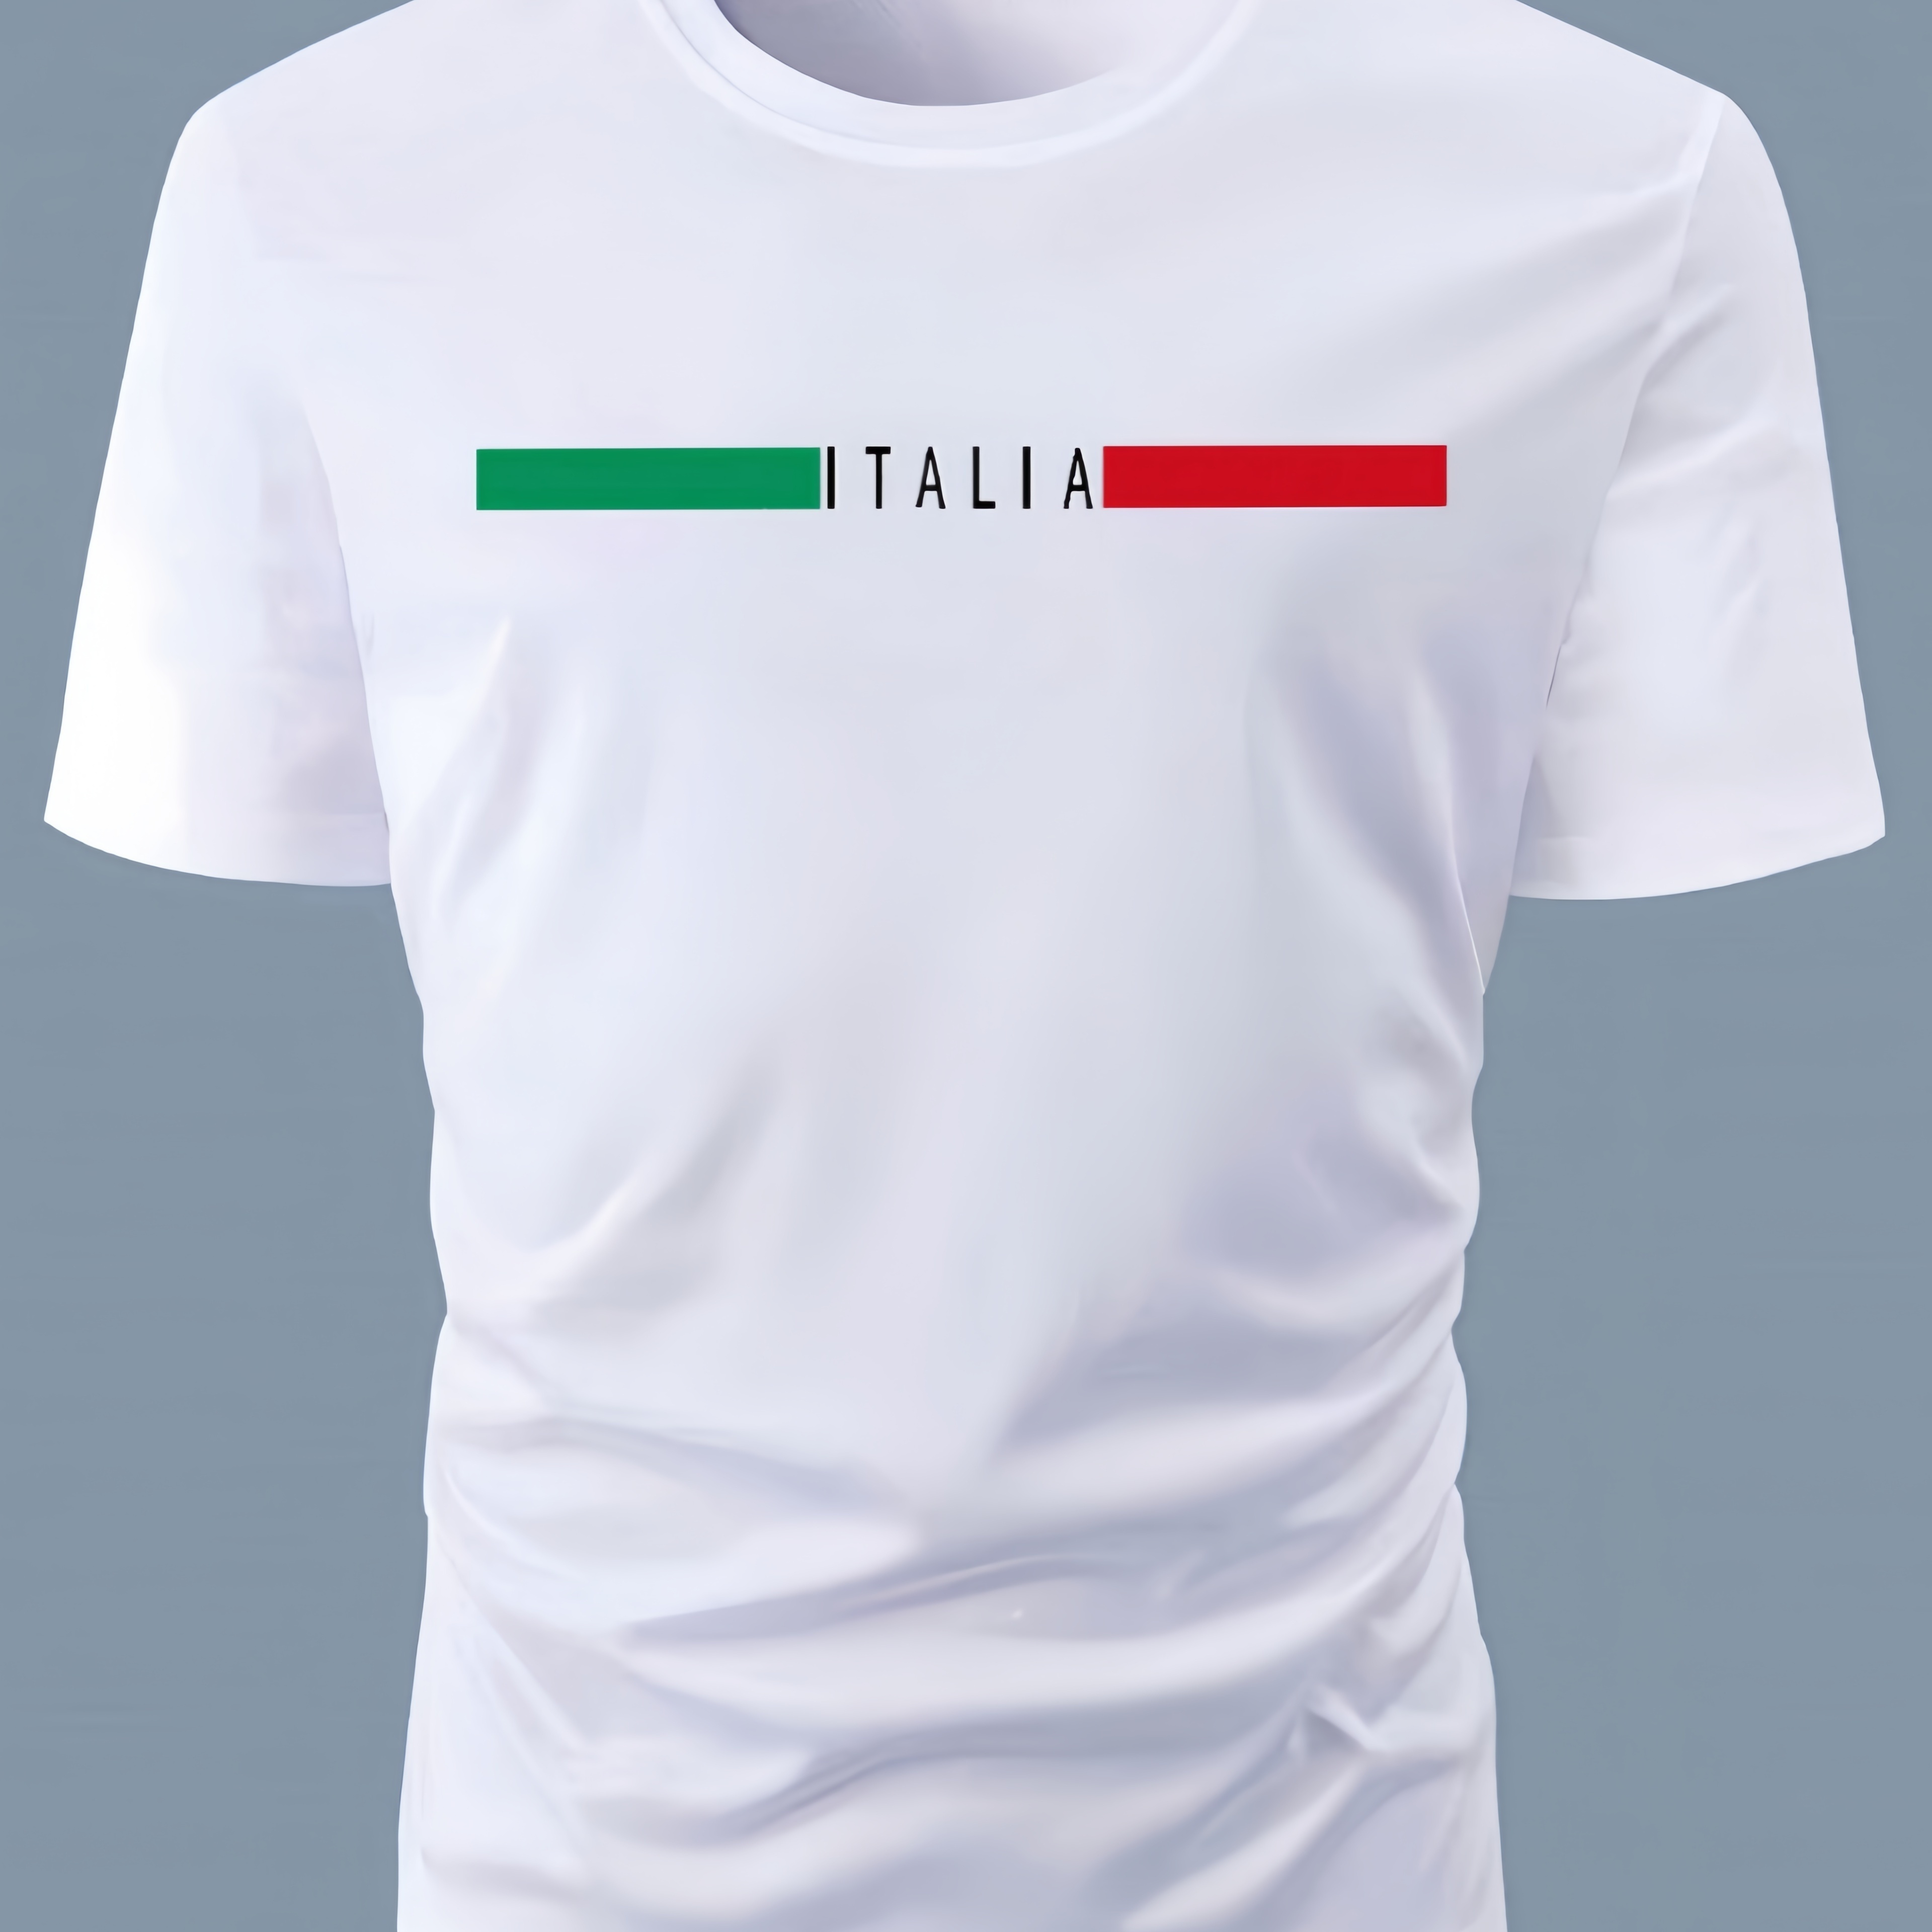 

Italia Print, Men's Graphic Design Crew Neck Active T-shirt, Casual Comfy Tees Tshirts For Summer, Men's Clothing Tops For Daily Gym Workout Running